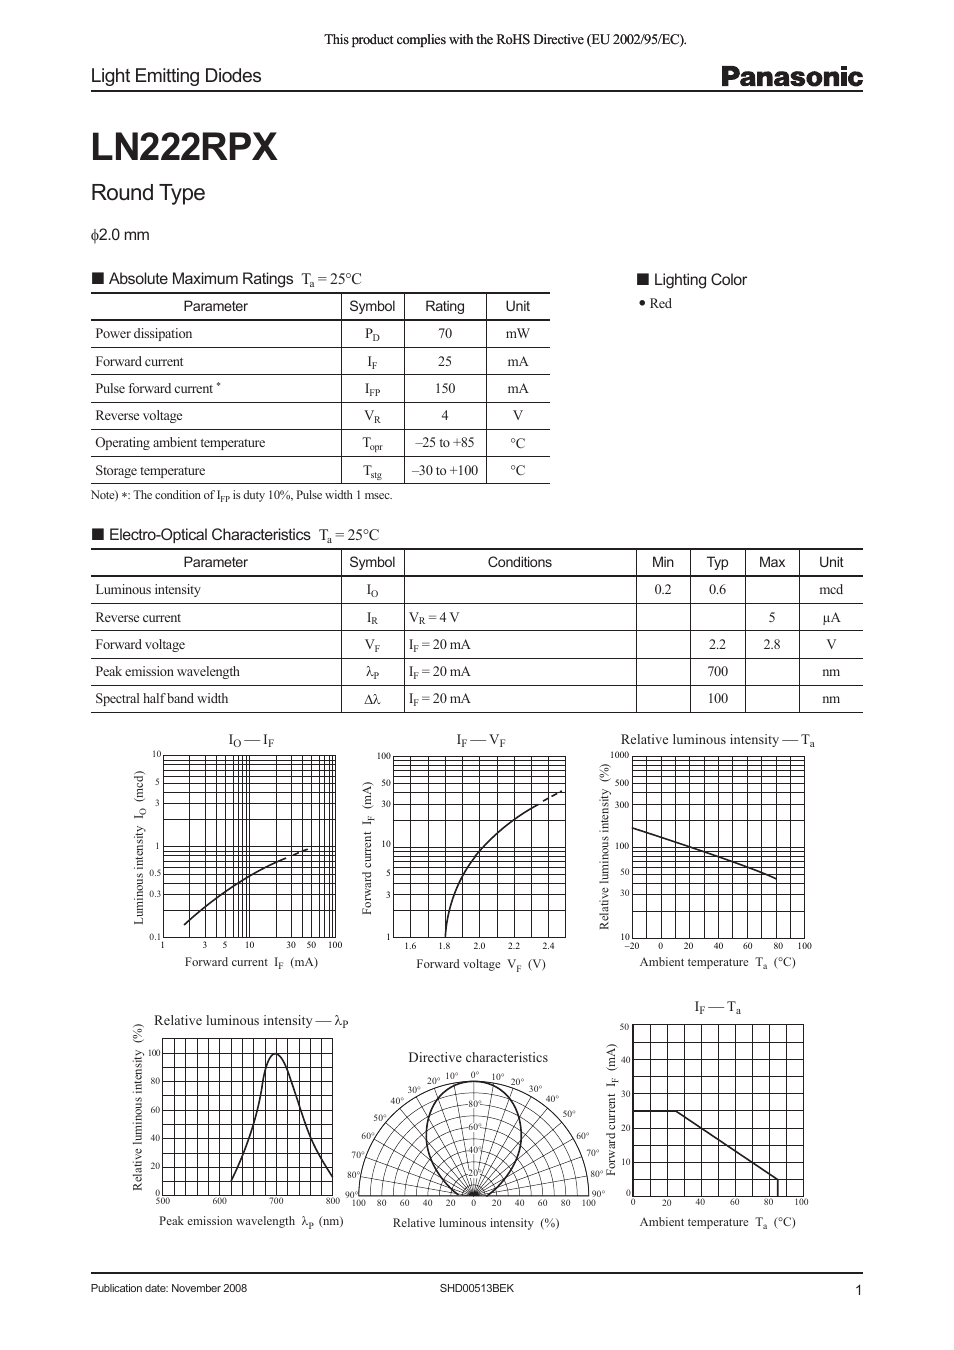 Panasonic Light Emitting Diodes LN222RPX User Manual | 3 pages